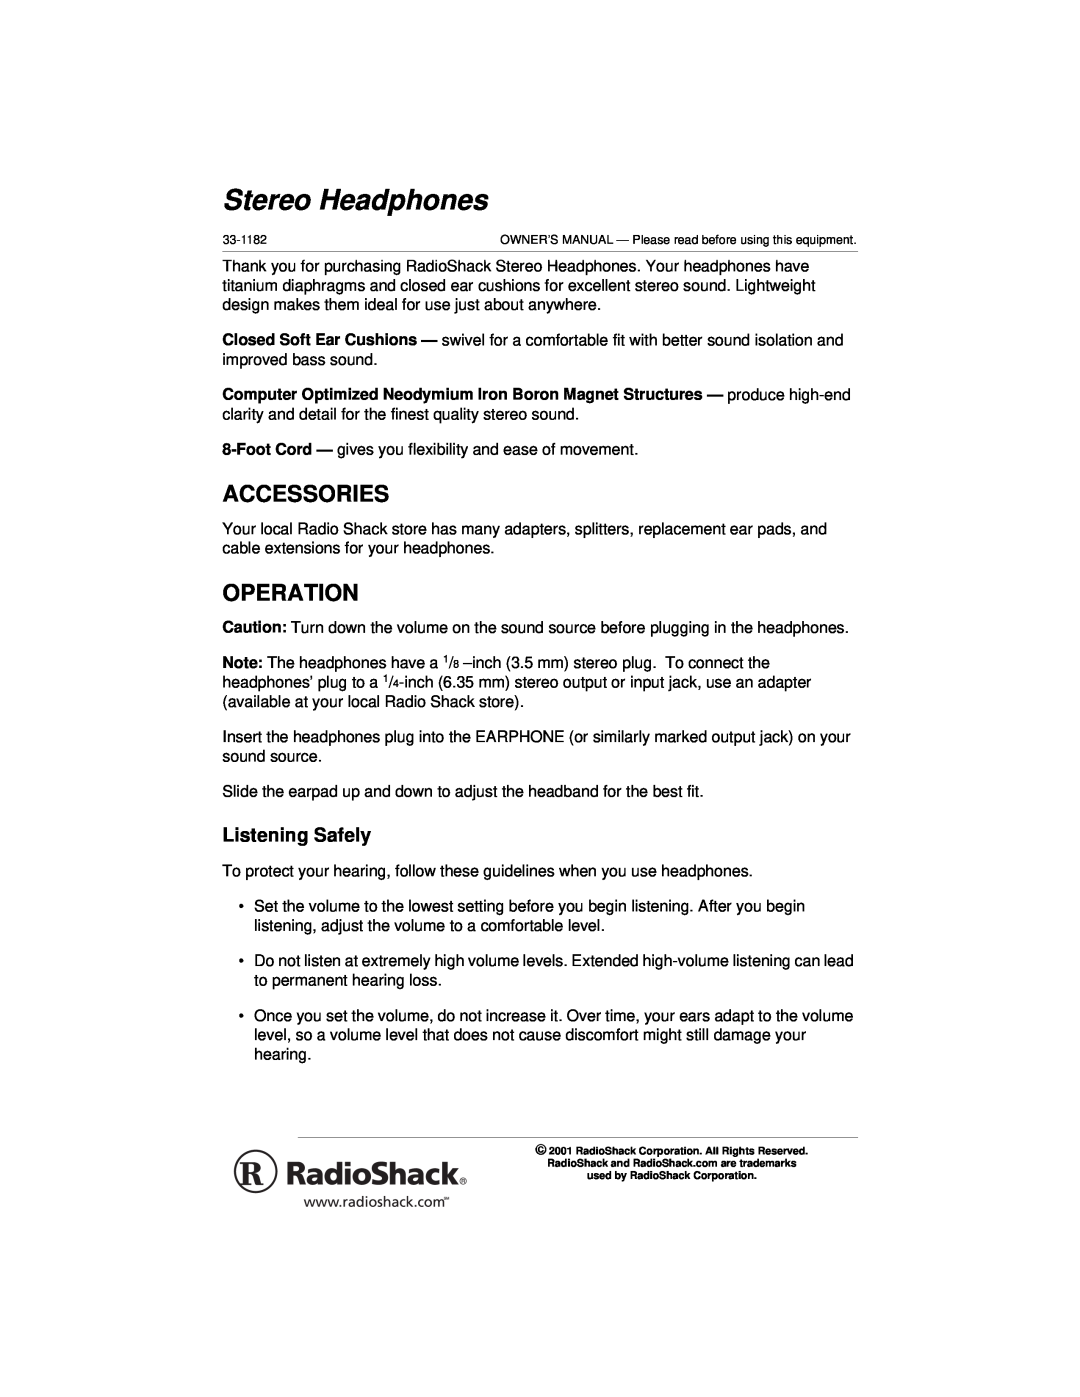 Radio Shack 33-1182 owner manual Accessories, Operation, Listening Safely, Stereo Headphones 